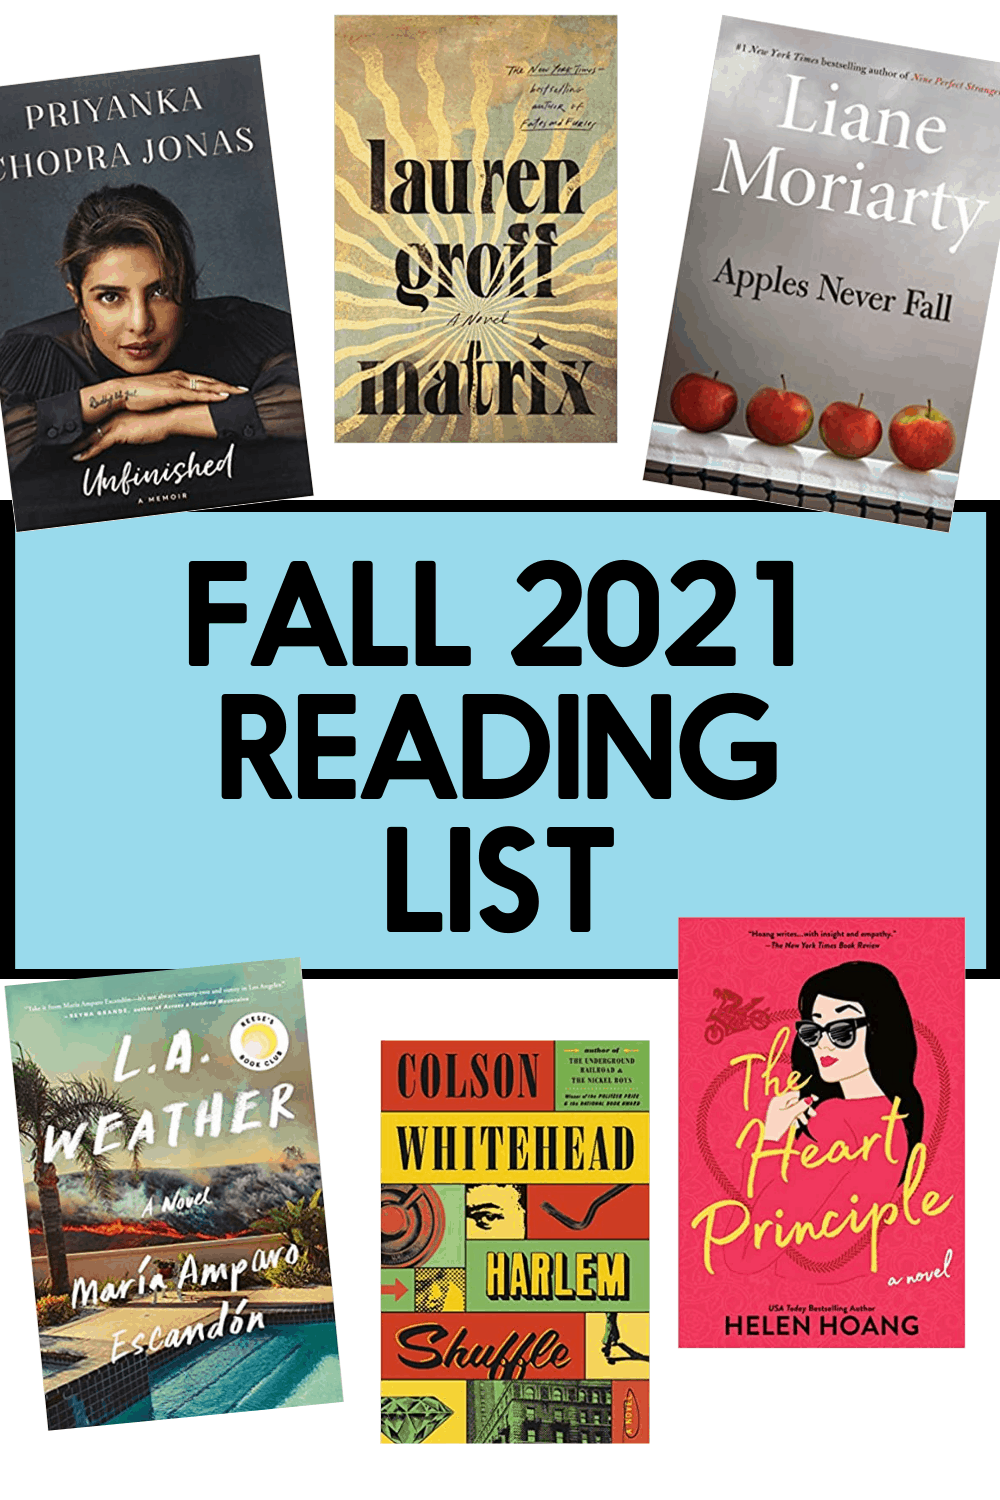 16 Books to Read this Fall